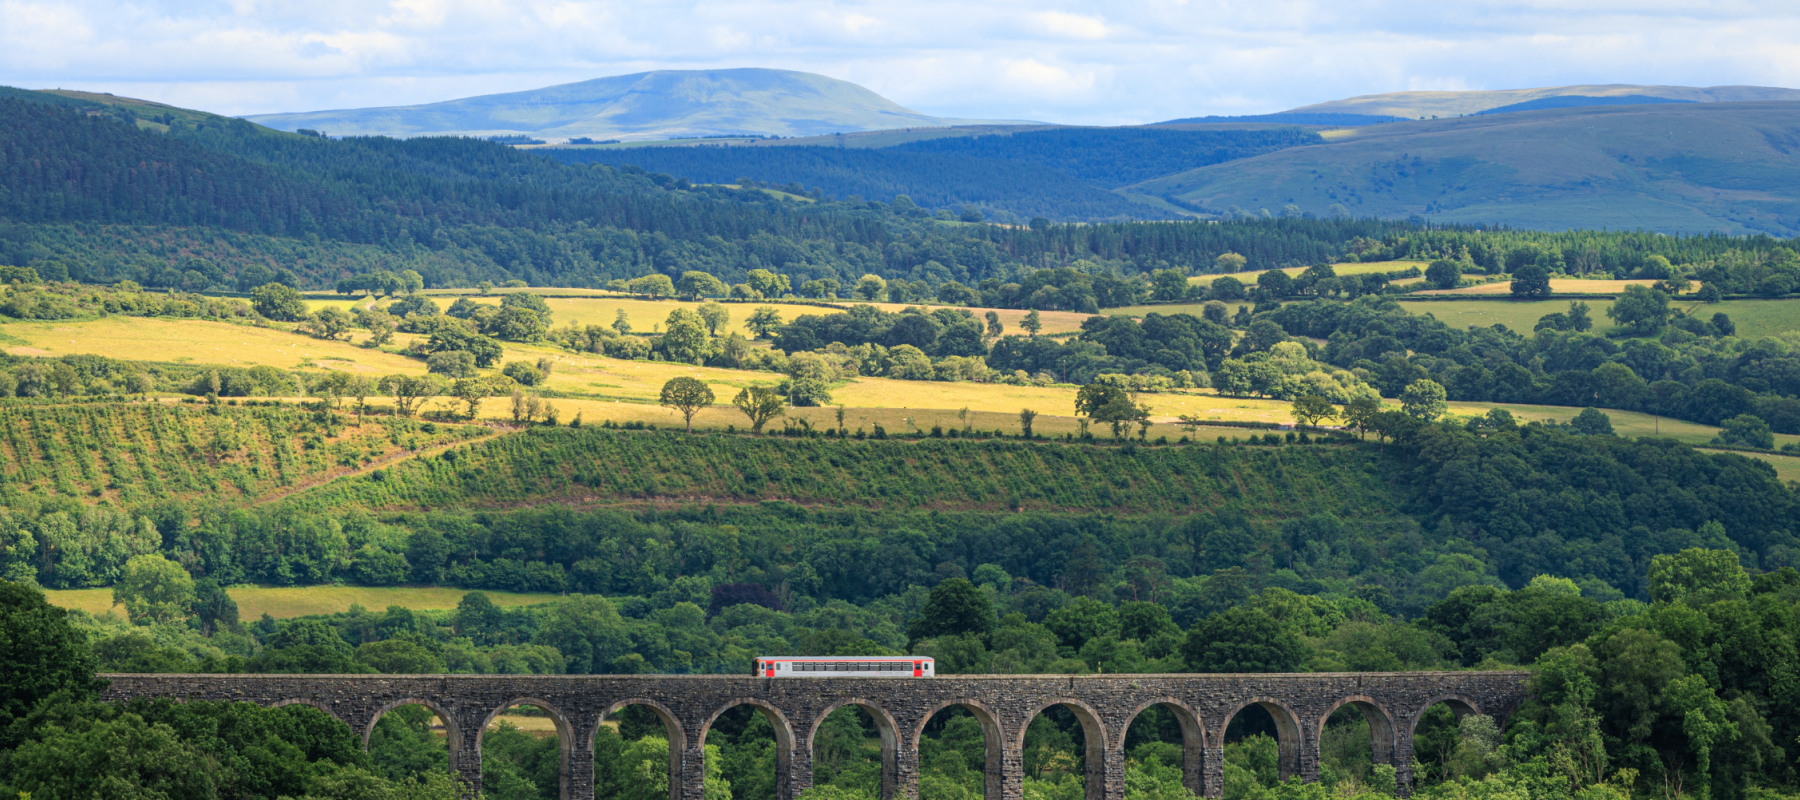 Train travelling across viaduct surrounded by lush green Welsh countryside